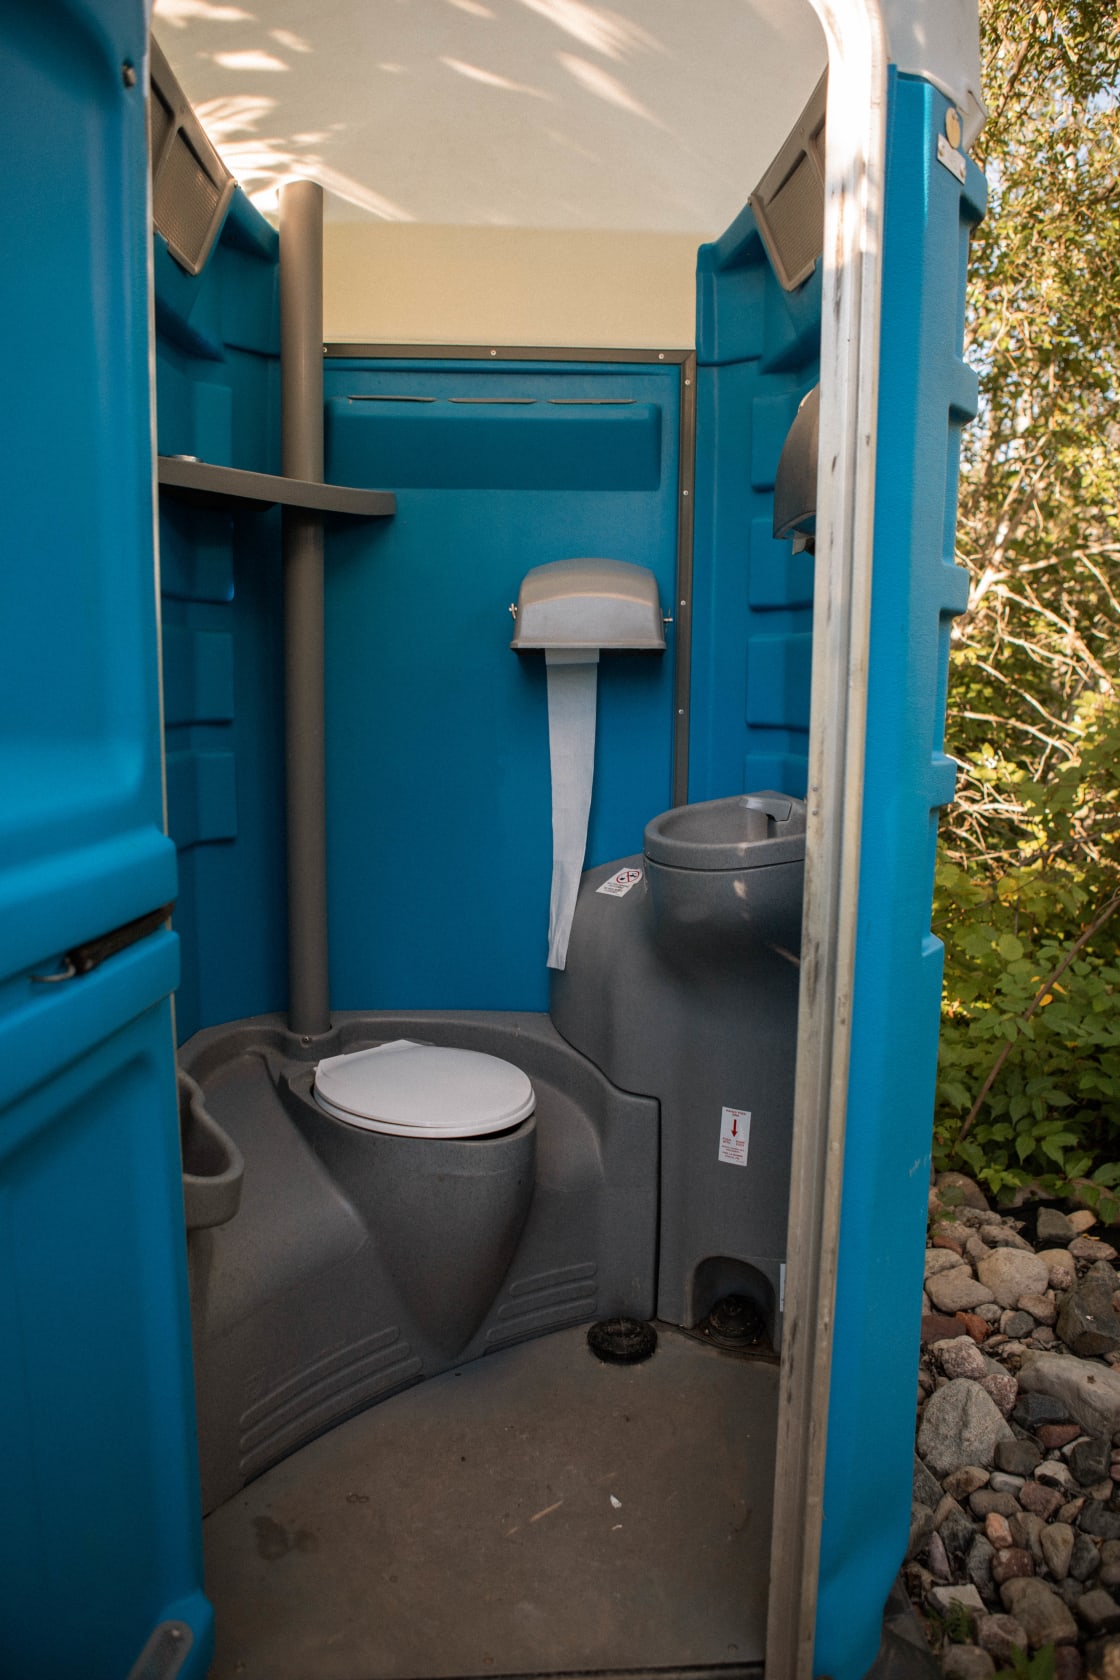 The Portable restroom included a sink too, which was nice. 